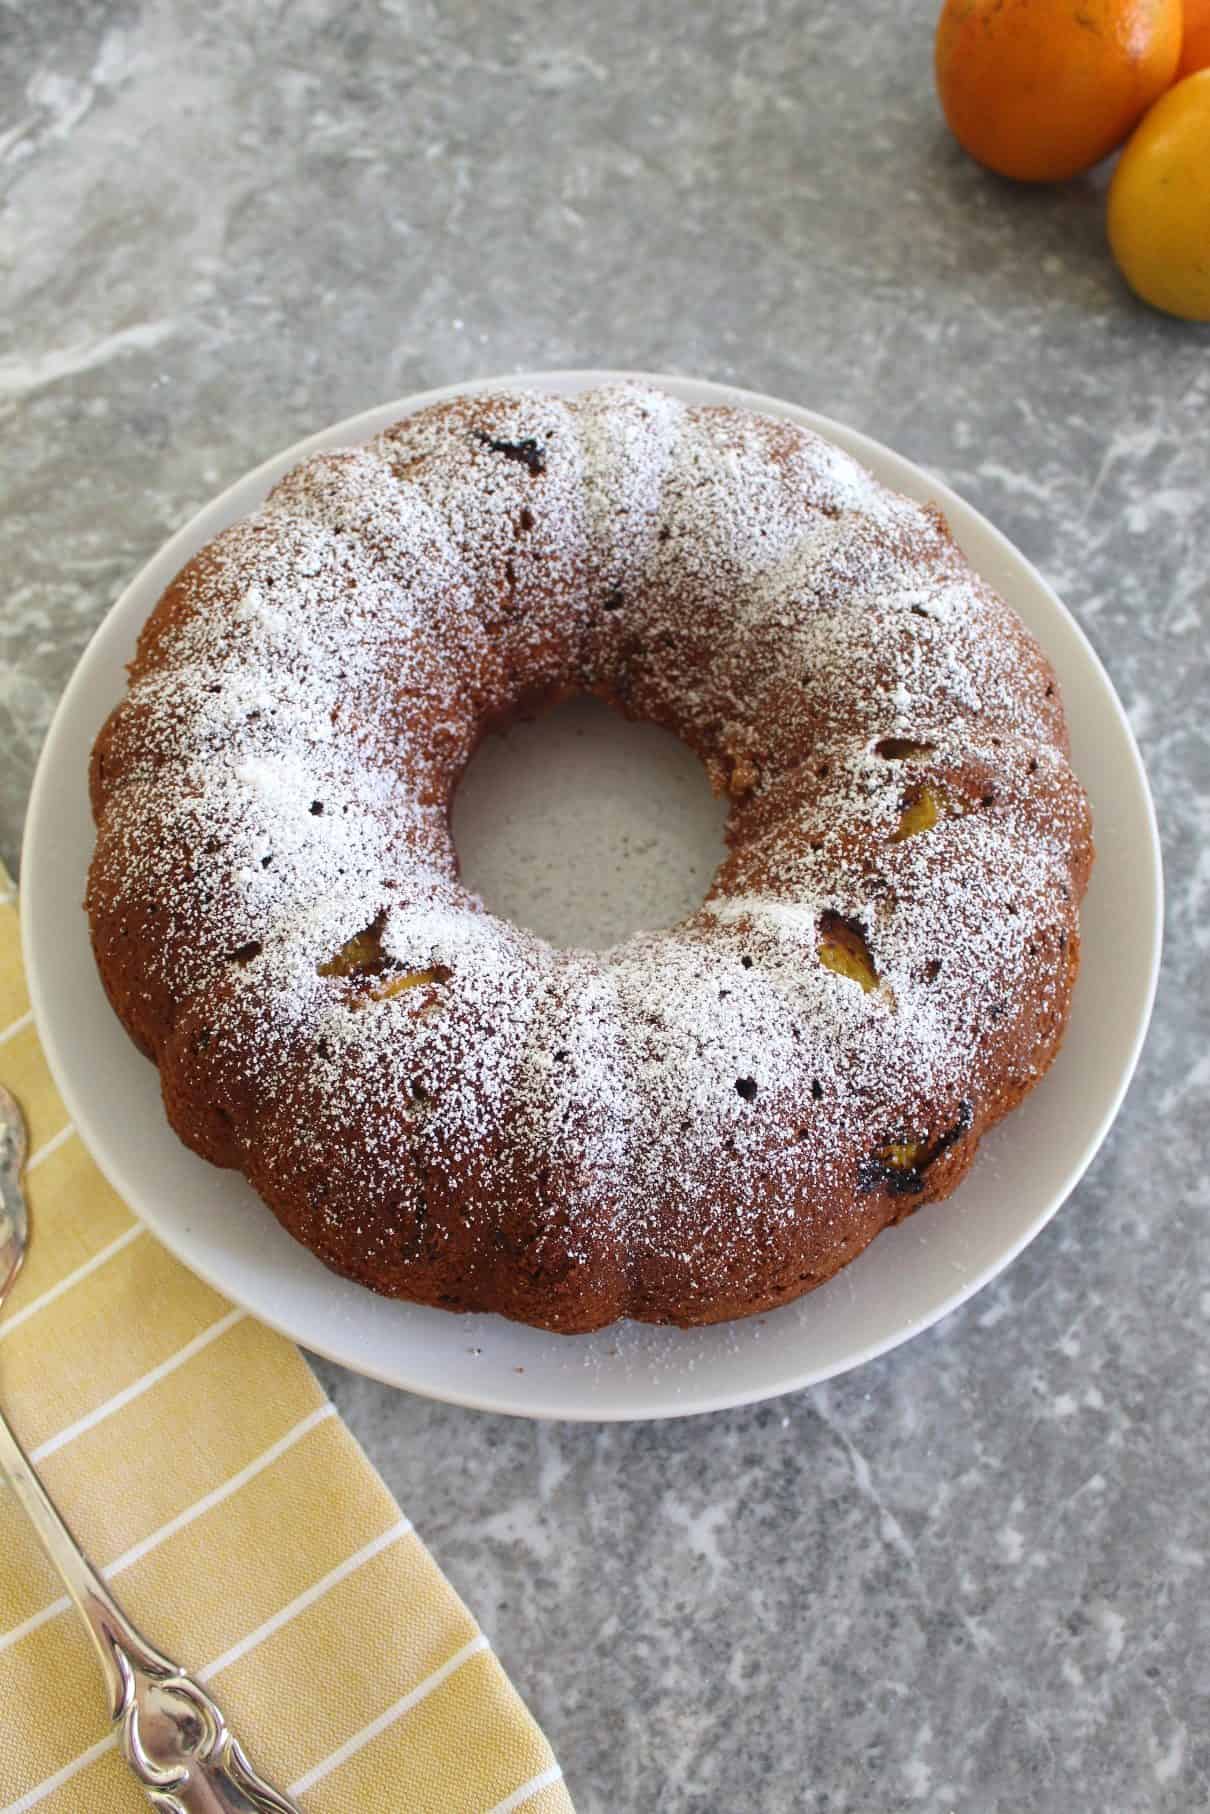 Orange bundt cake with walnuts shown on a white plate, sprinkled with confectioner's sugar.